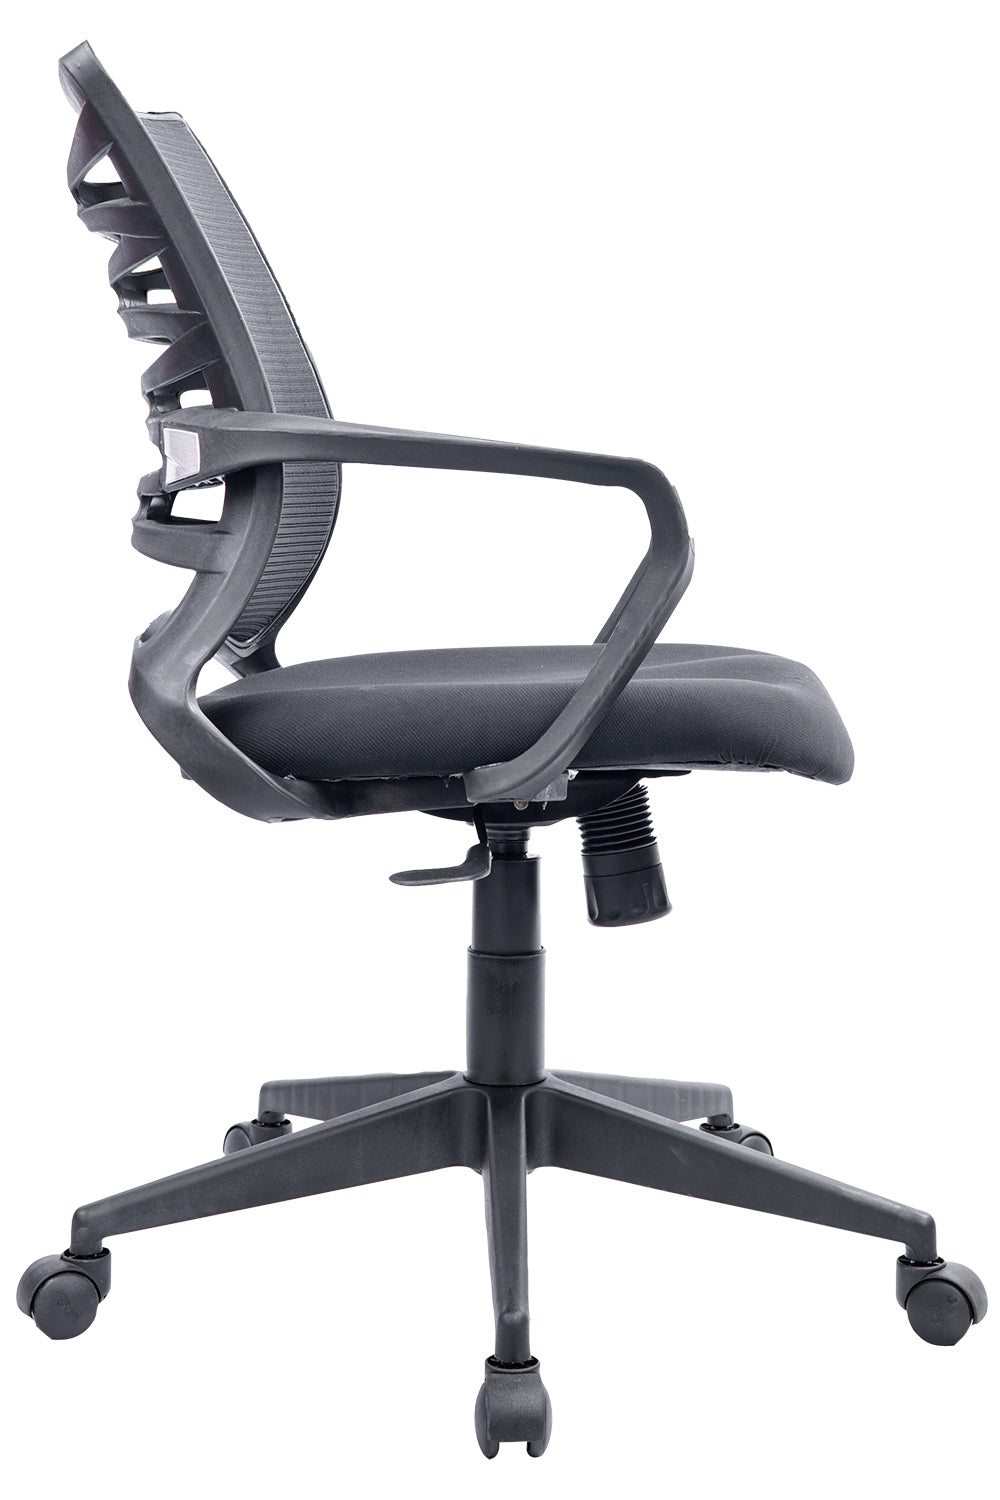 Boris Mid Back Ergonomic Office Chair With Mesh And Chrome Base- Black